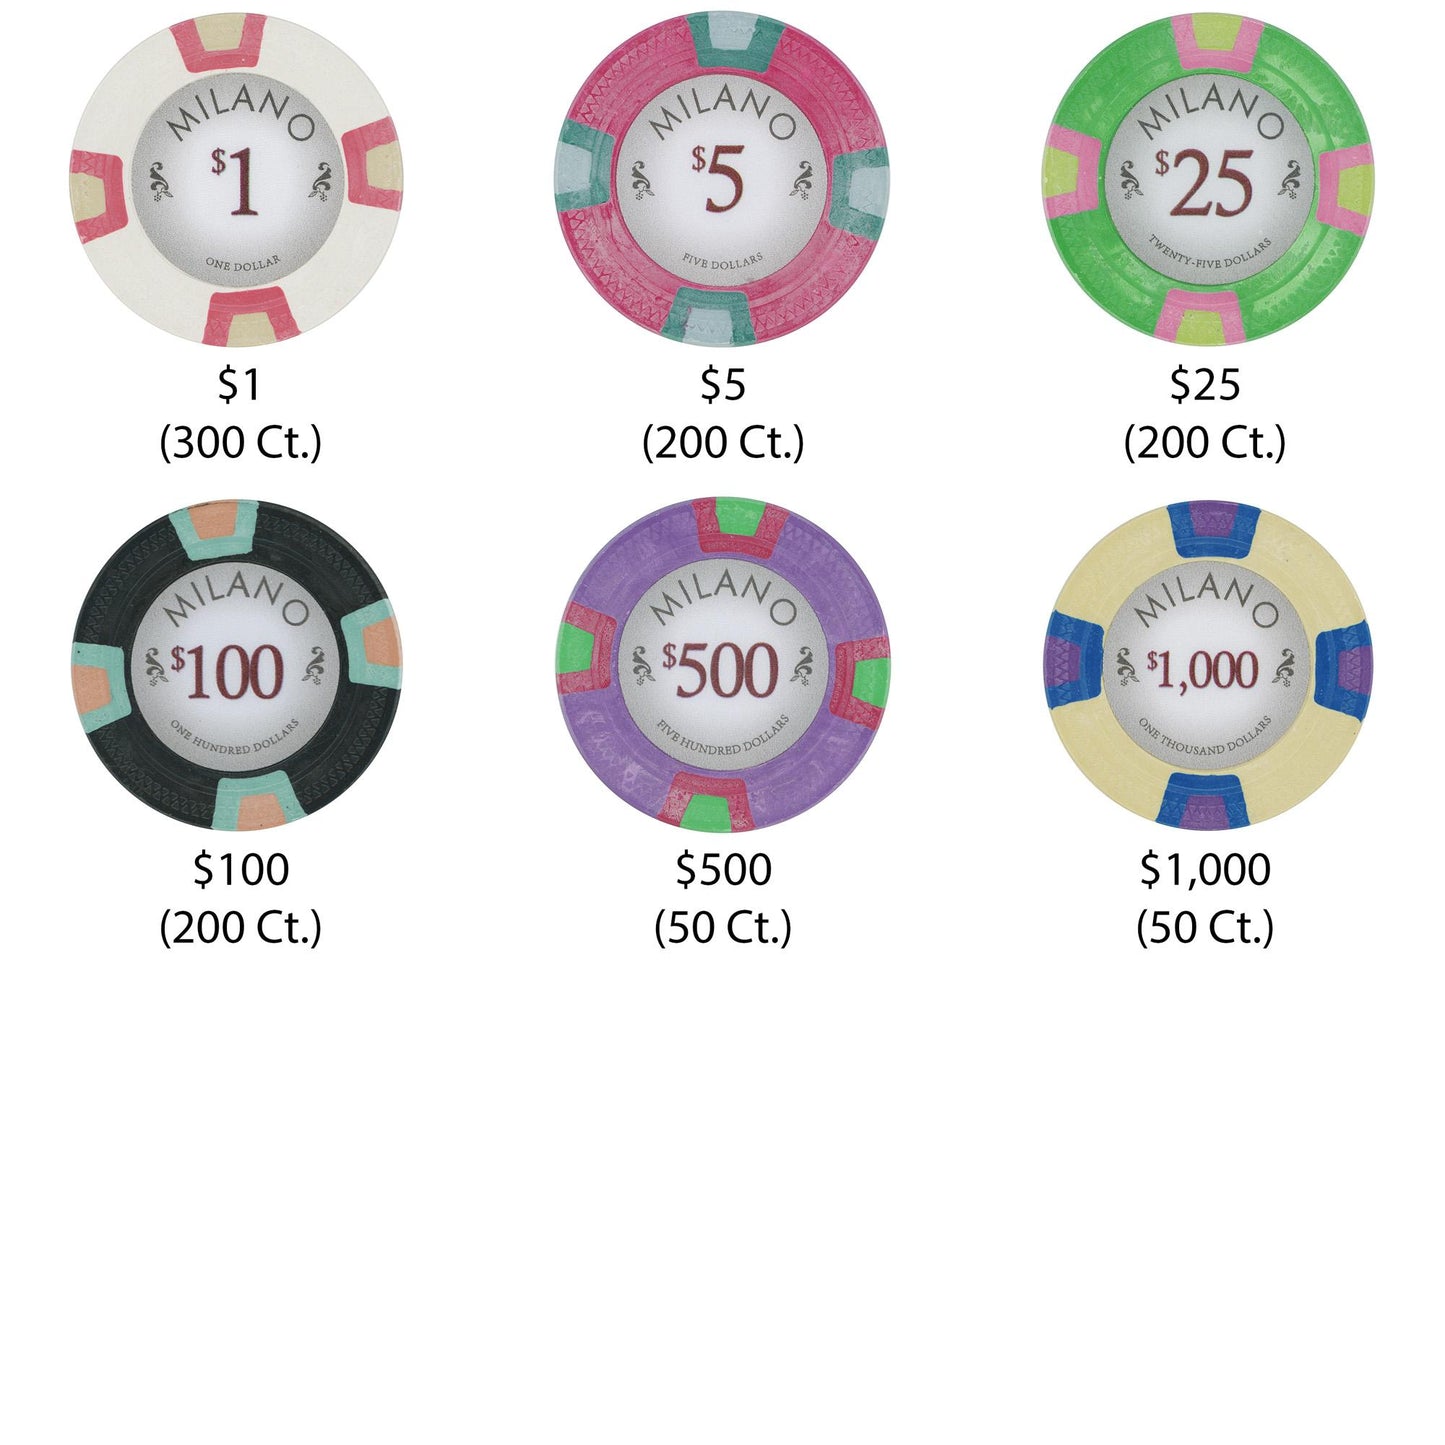 1000 Milano Poker Chips with Acrylic Carrier